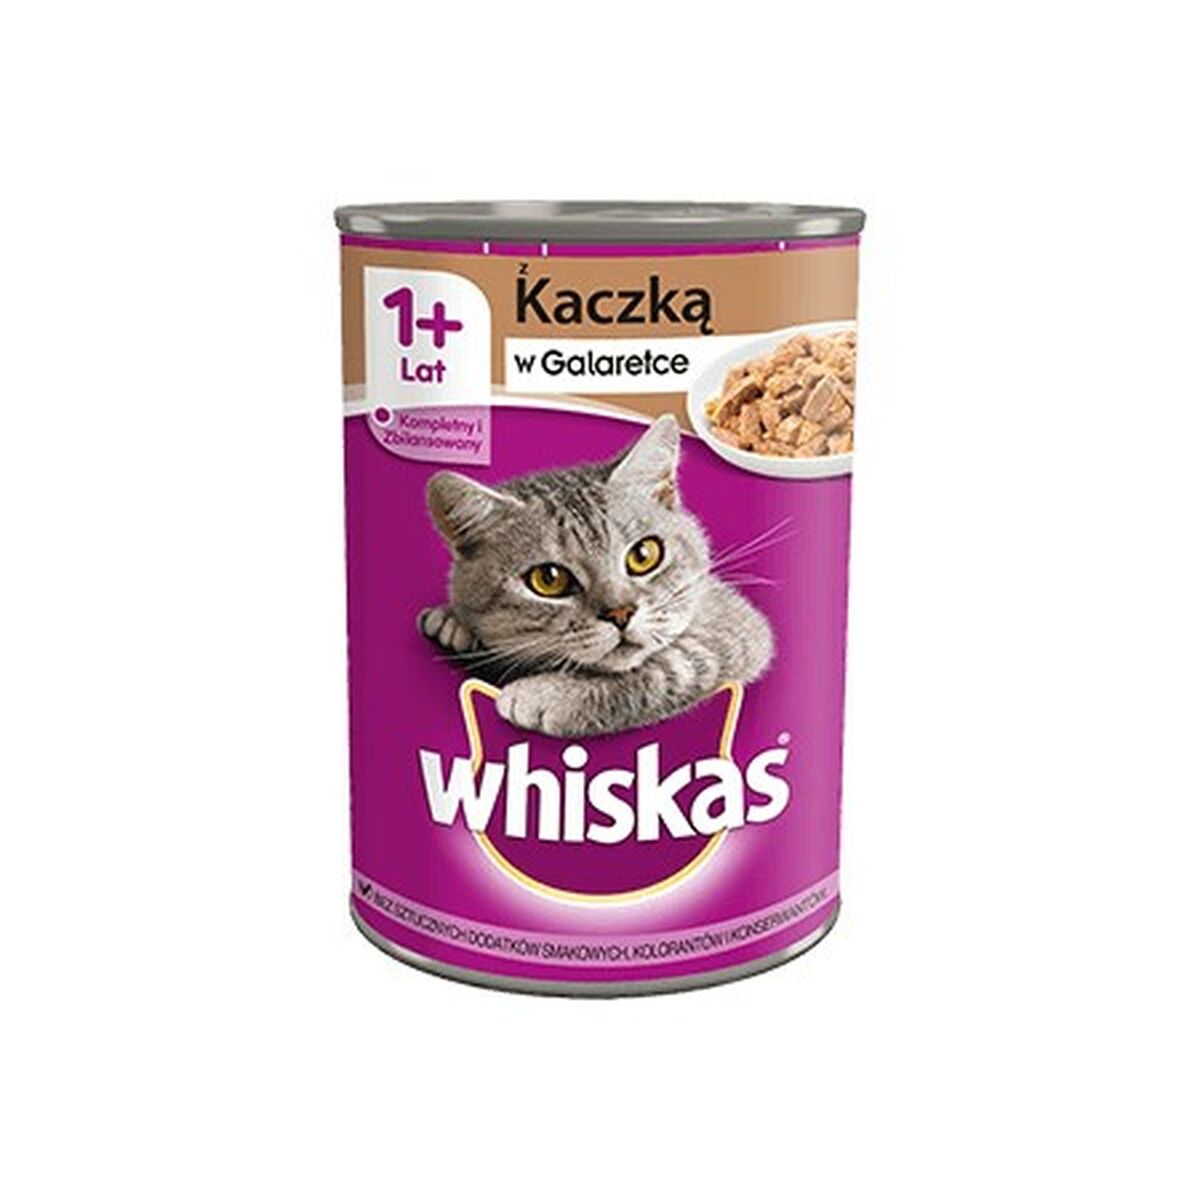 Aliments pour chat Whiskas   Canard